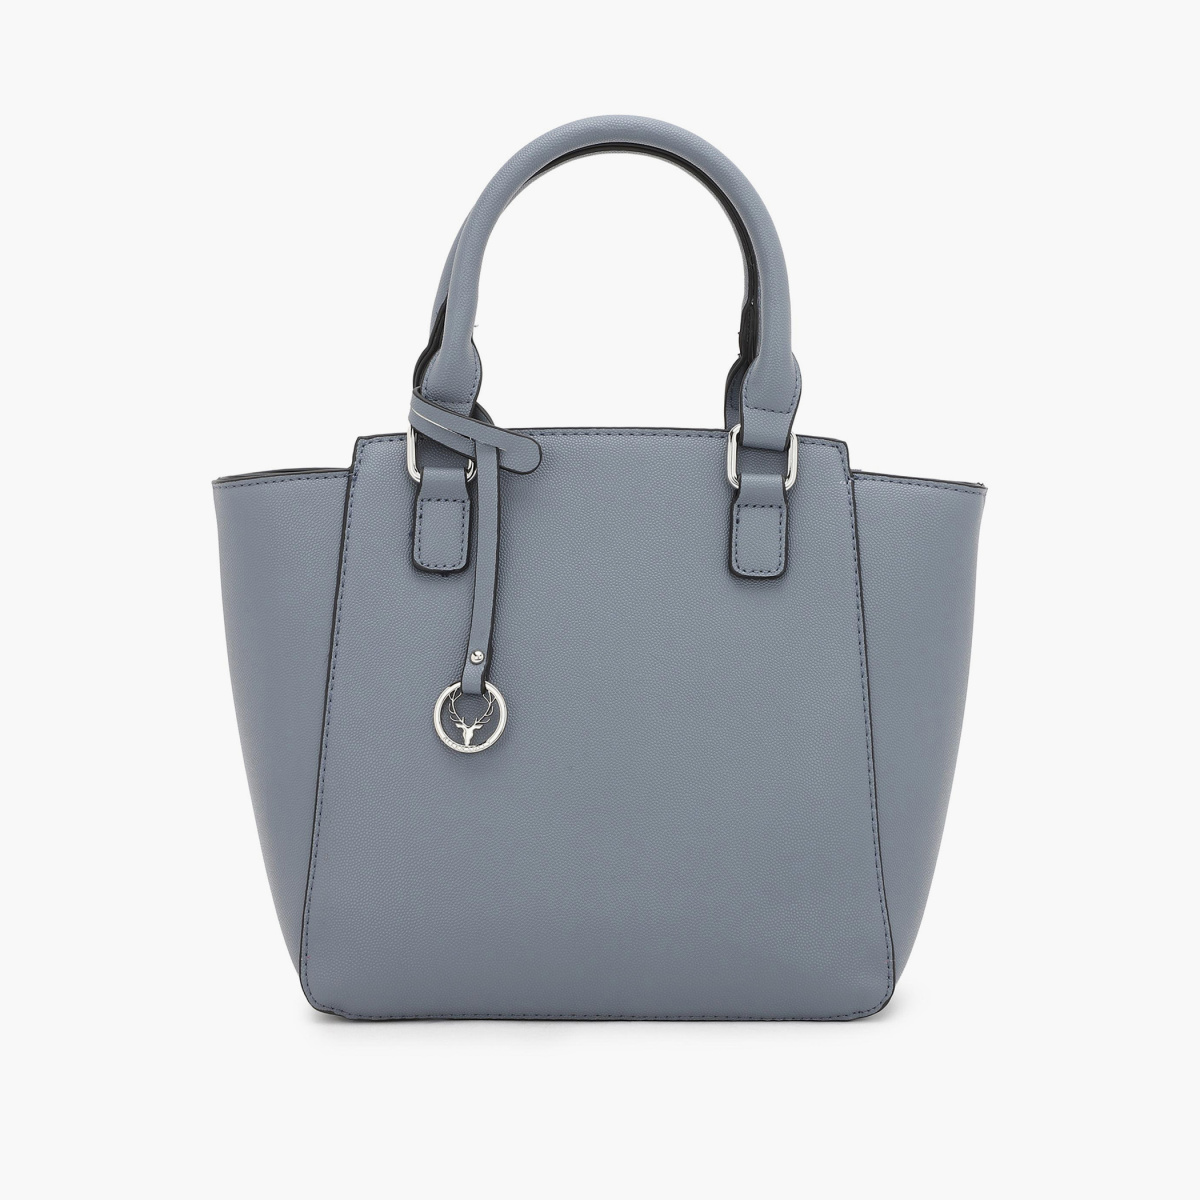 Allen Solly Woman Bags, Allen Solly Blue Tote Bag for Women at